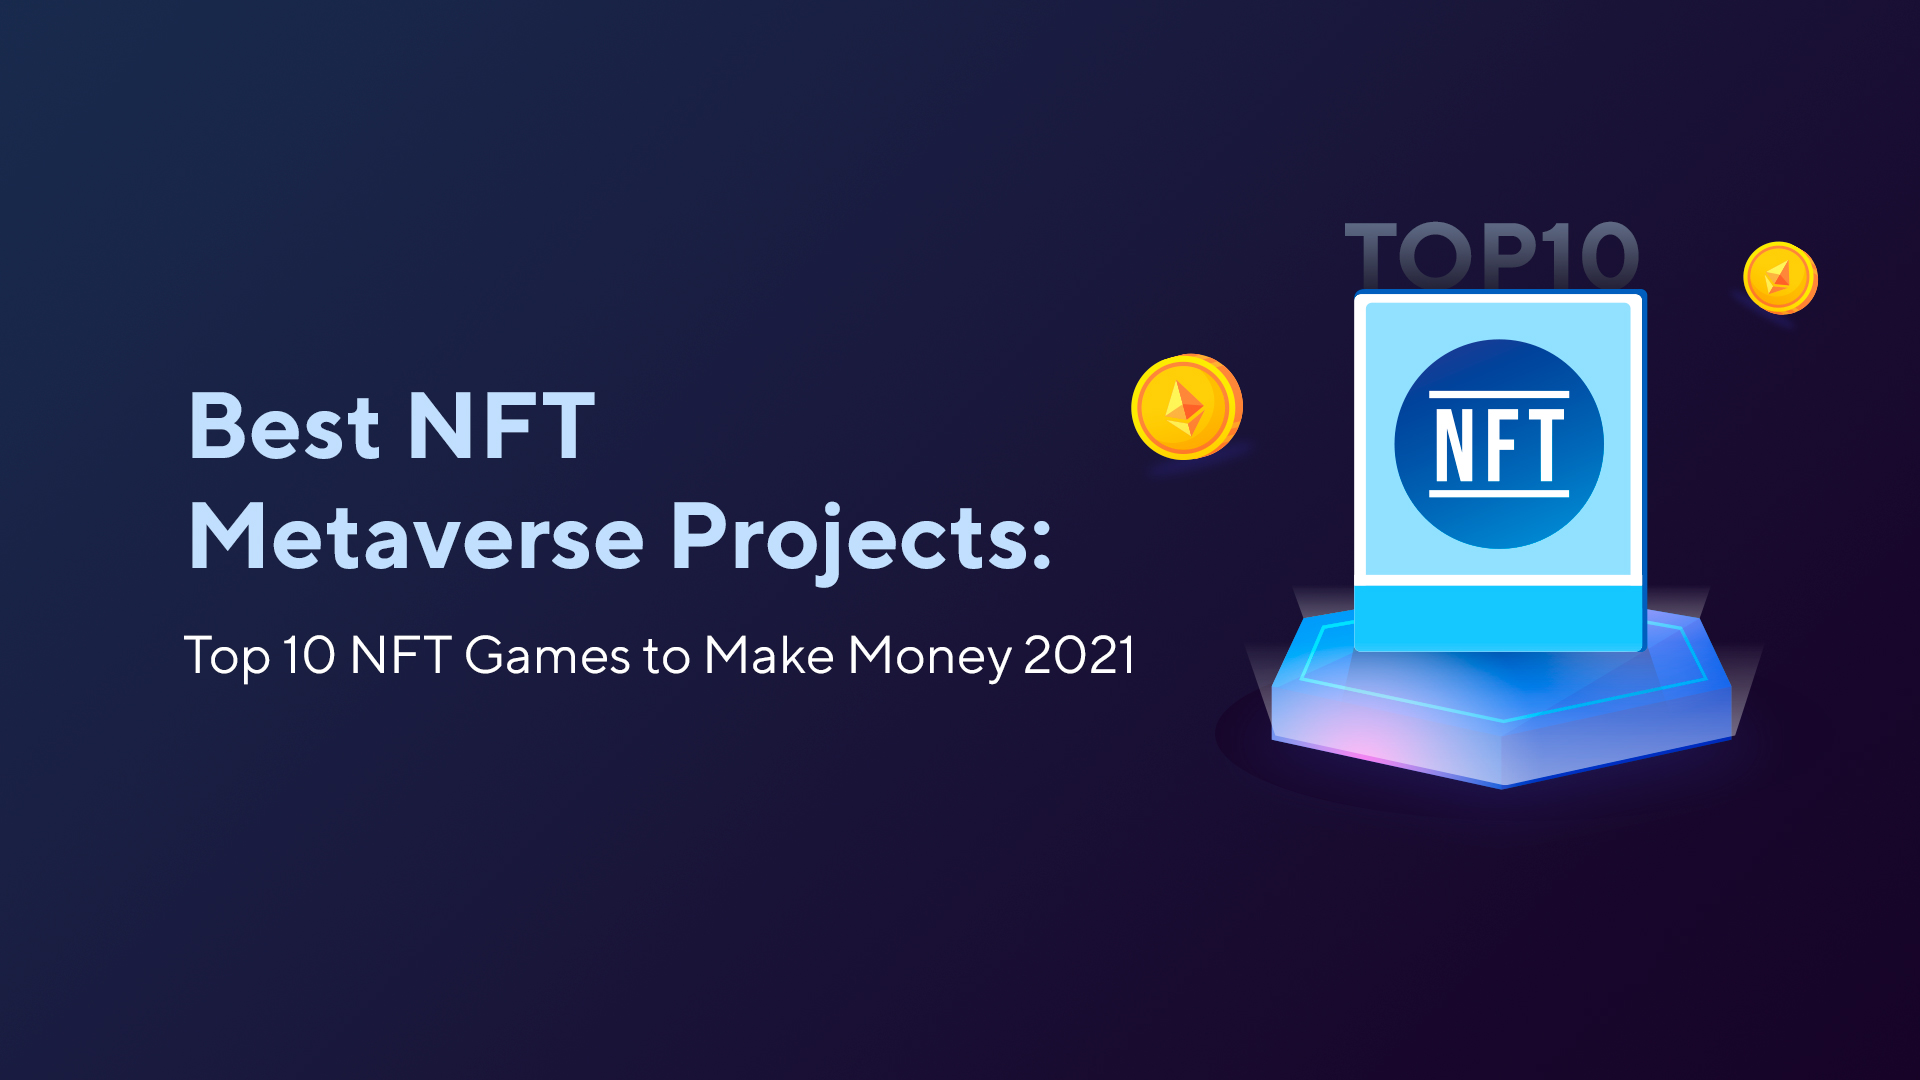 Best NFT Metaverse Projects: Top 10 NFT Games to Make Money 2022